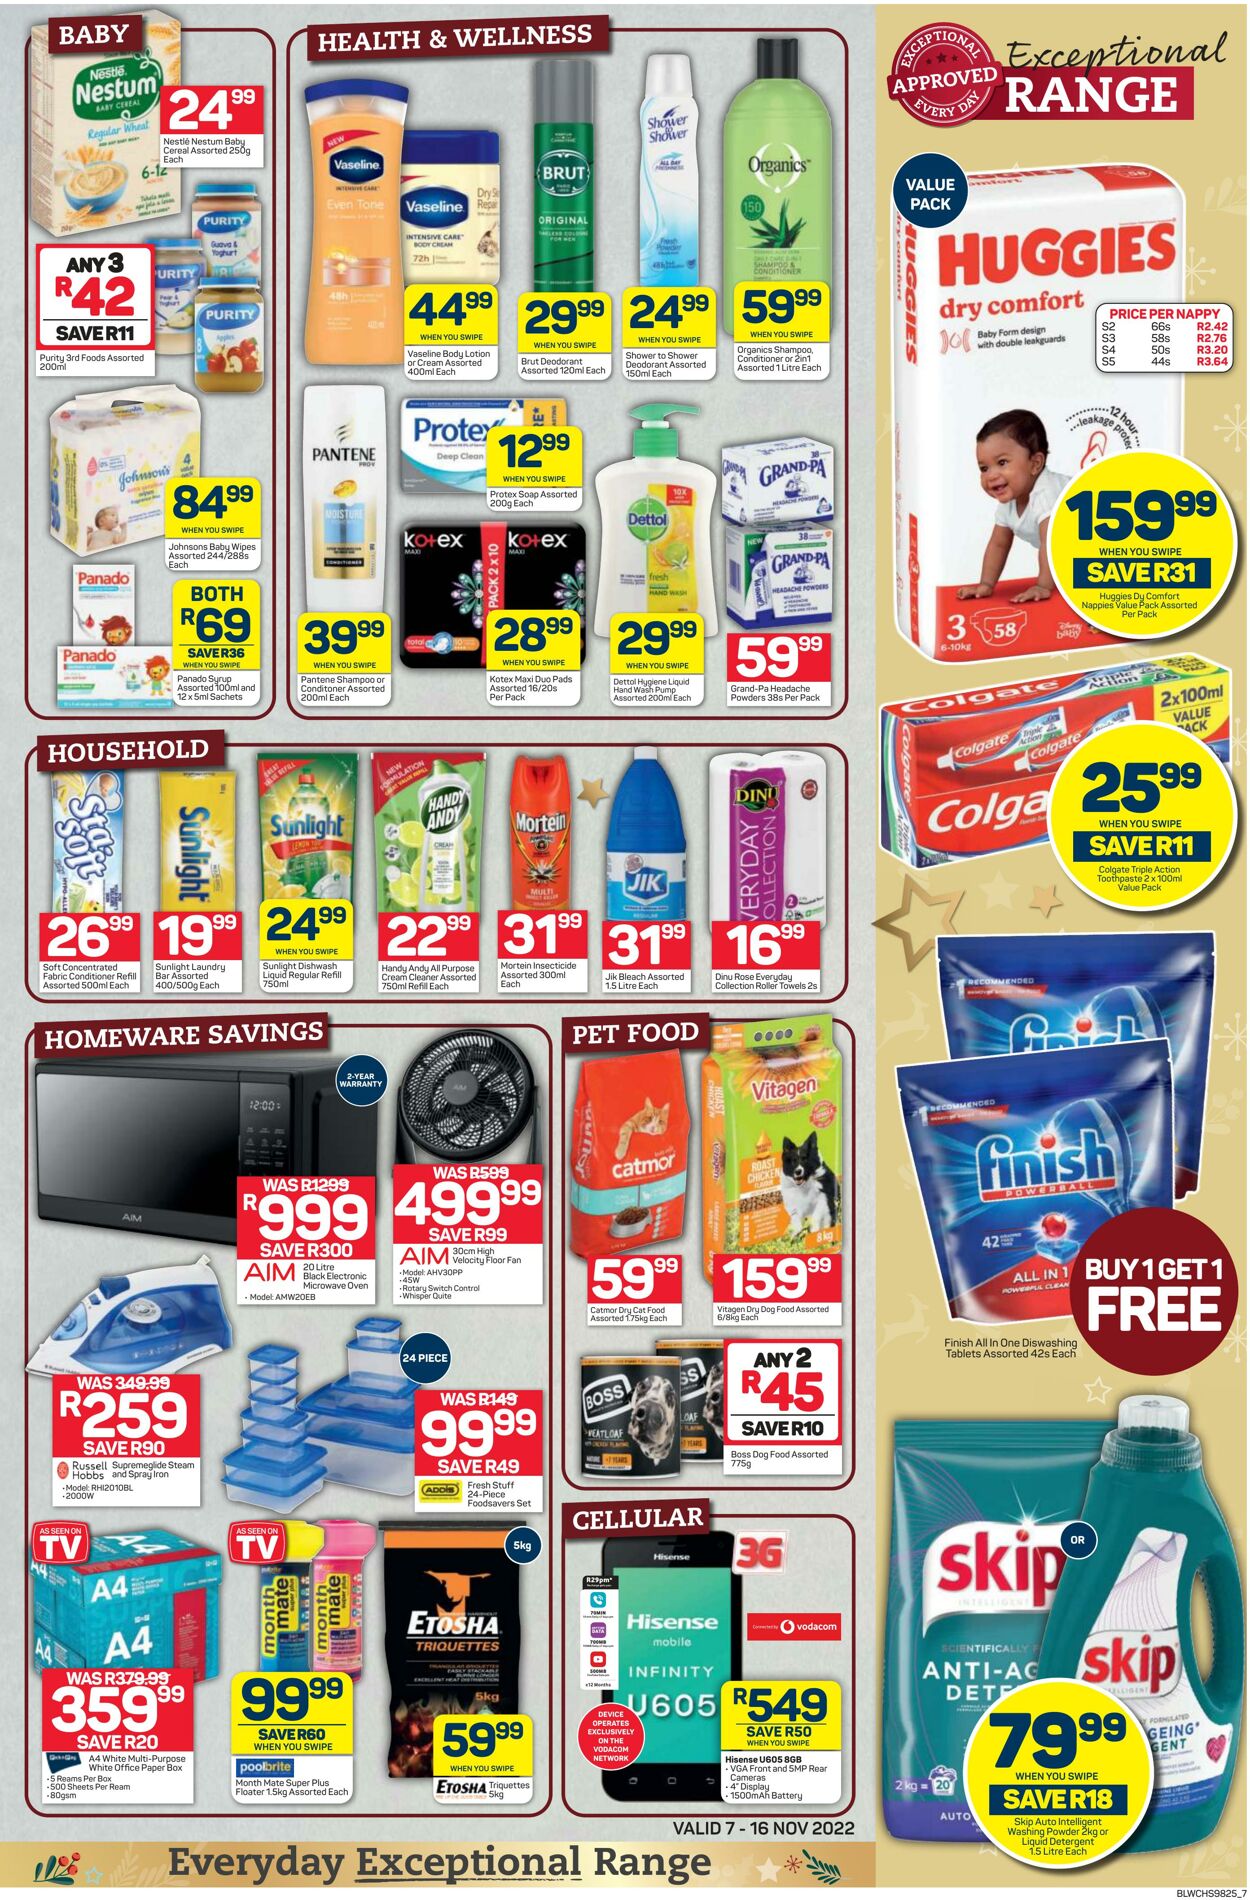 Special Pick n Pay 07.11.2022 - 16.11.2022